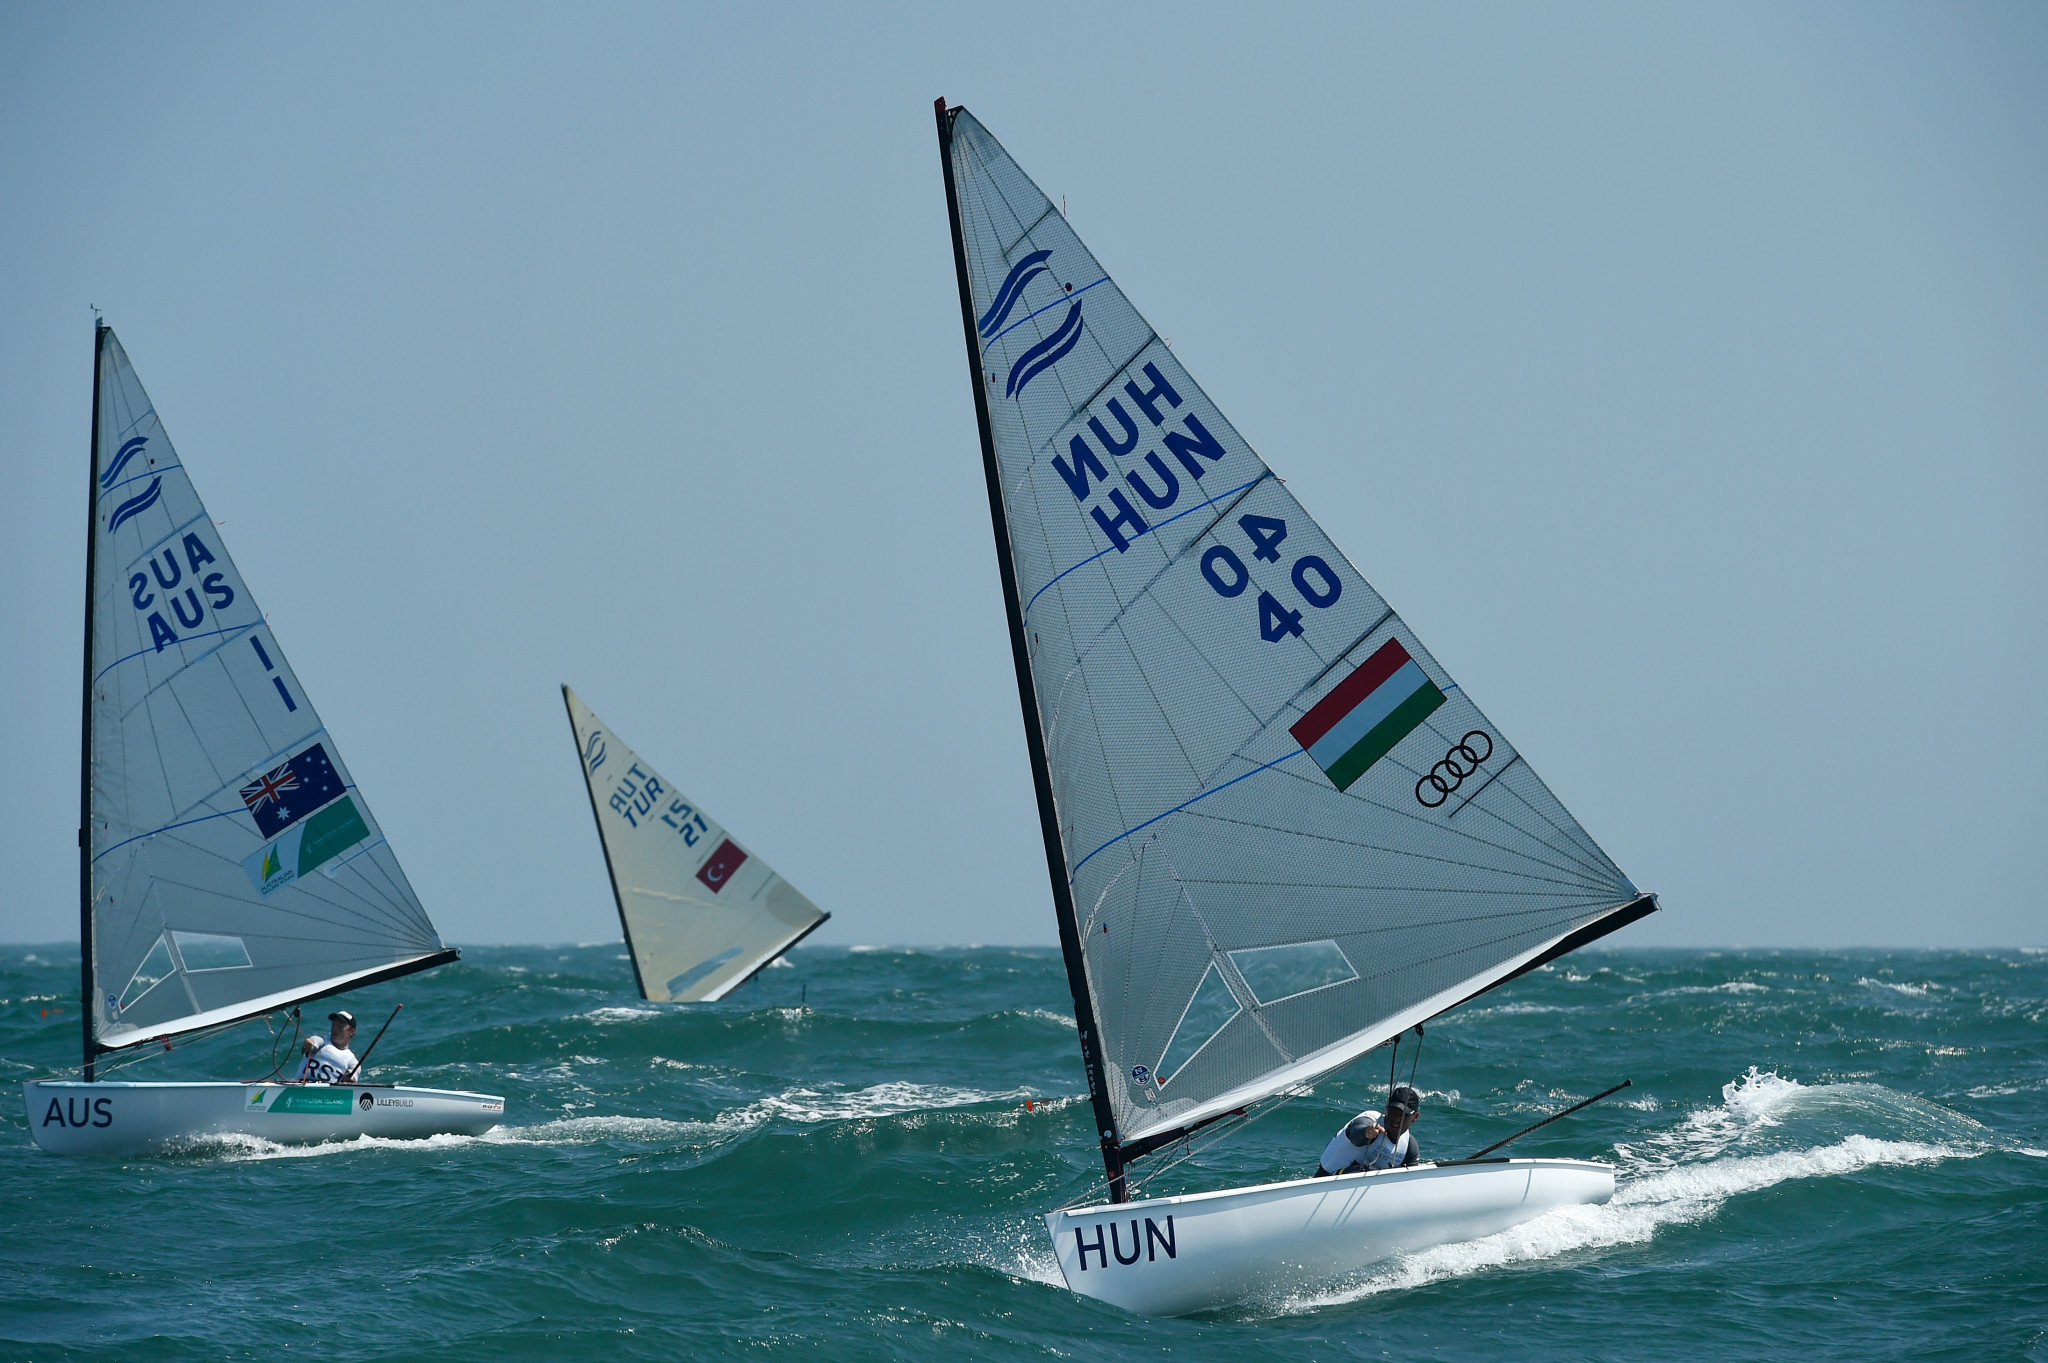 Test event winners return to Tokyo 2020 Olympic course for start of Sailing World Cup season